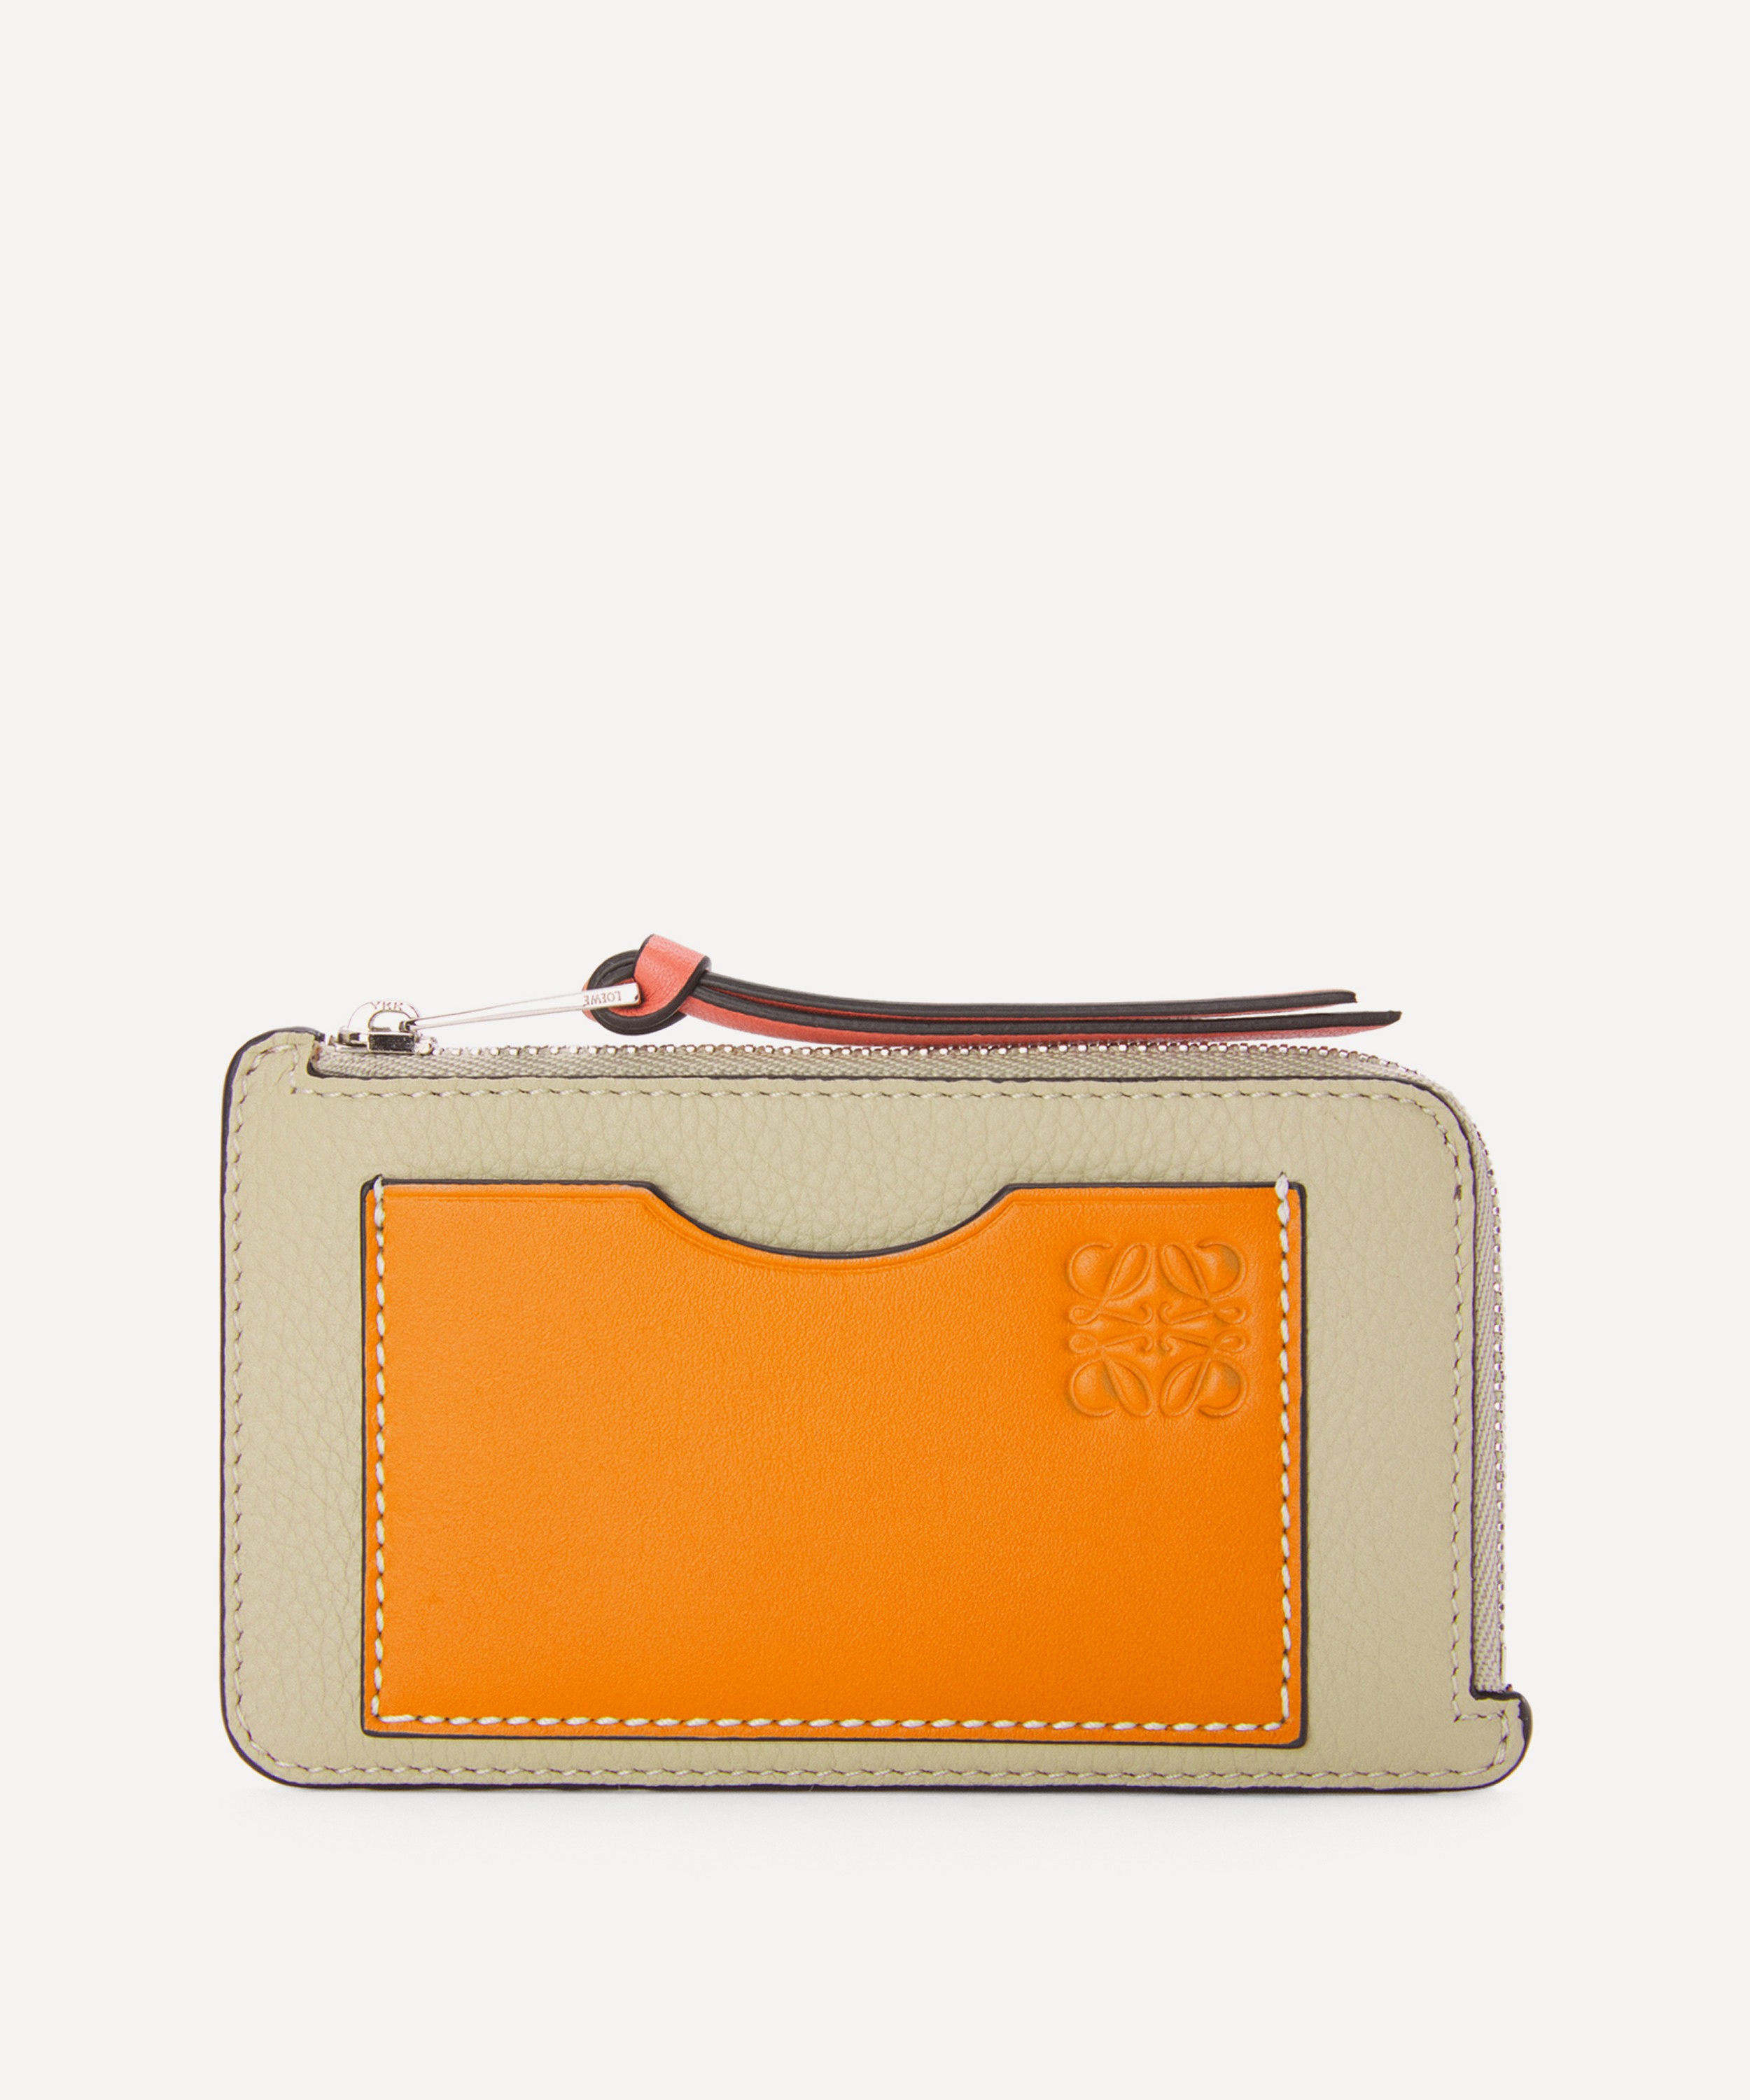 Loewe - Leather Coin Card Holder